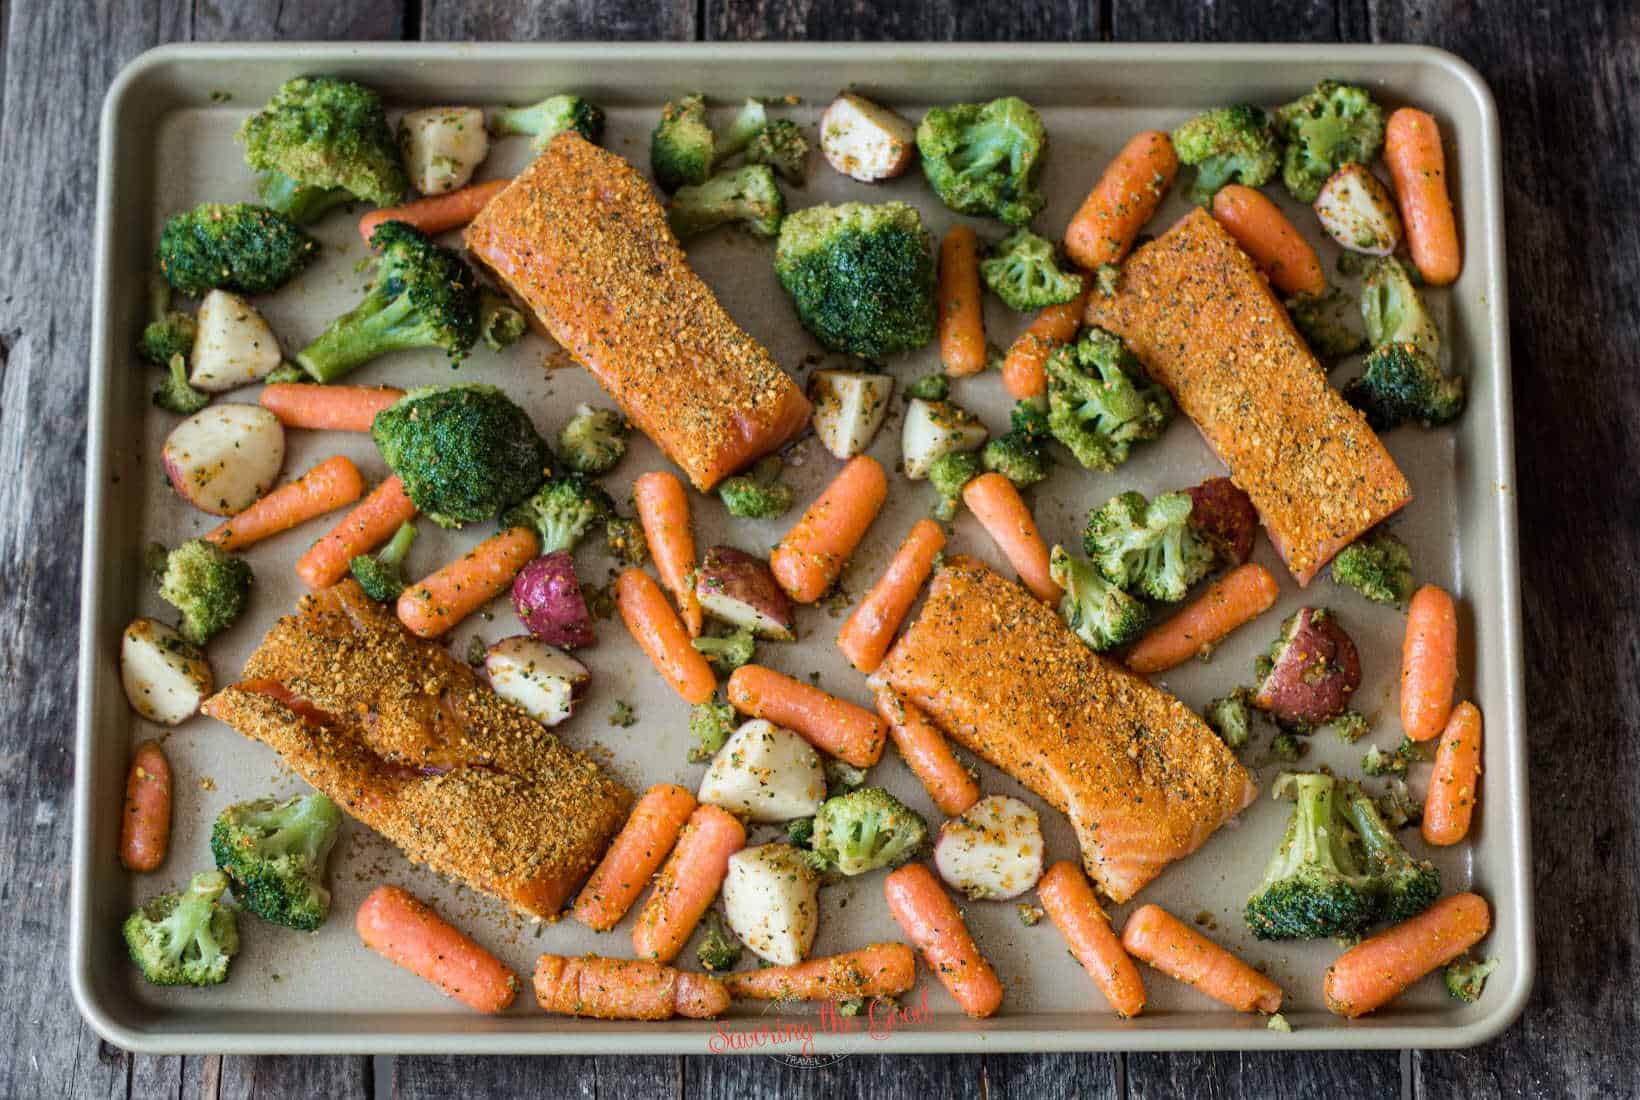 raw salmon and seasoned rw vegetables on a sheet pan for cooking.